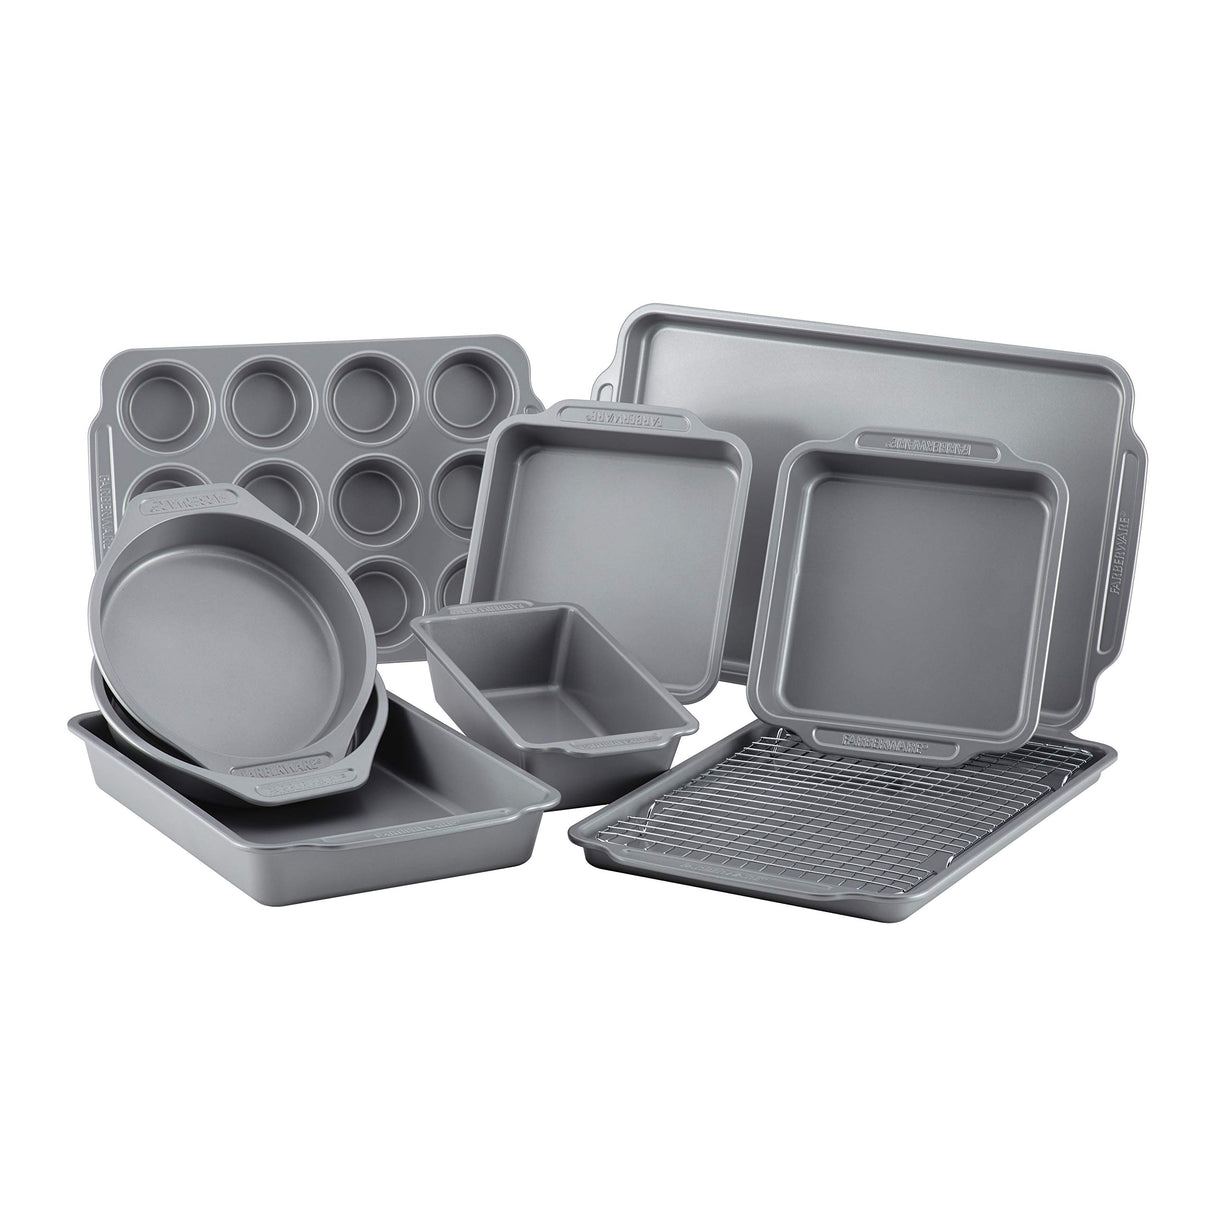 Farberware Nonstick Steel Bakeware Set with Cooling Rack, Baking Pan and Cookie Sheet Set with Nonstick Bread Pan and Cooling Grid, 10-Piece Set, Gray